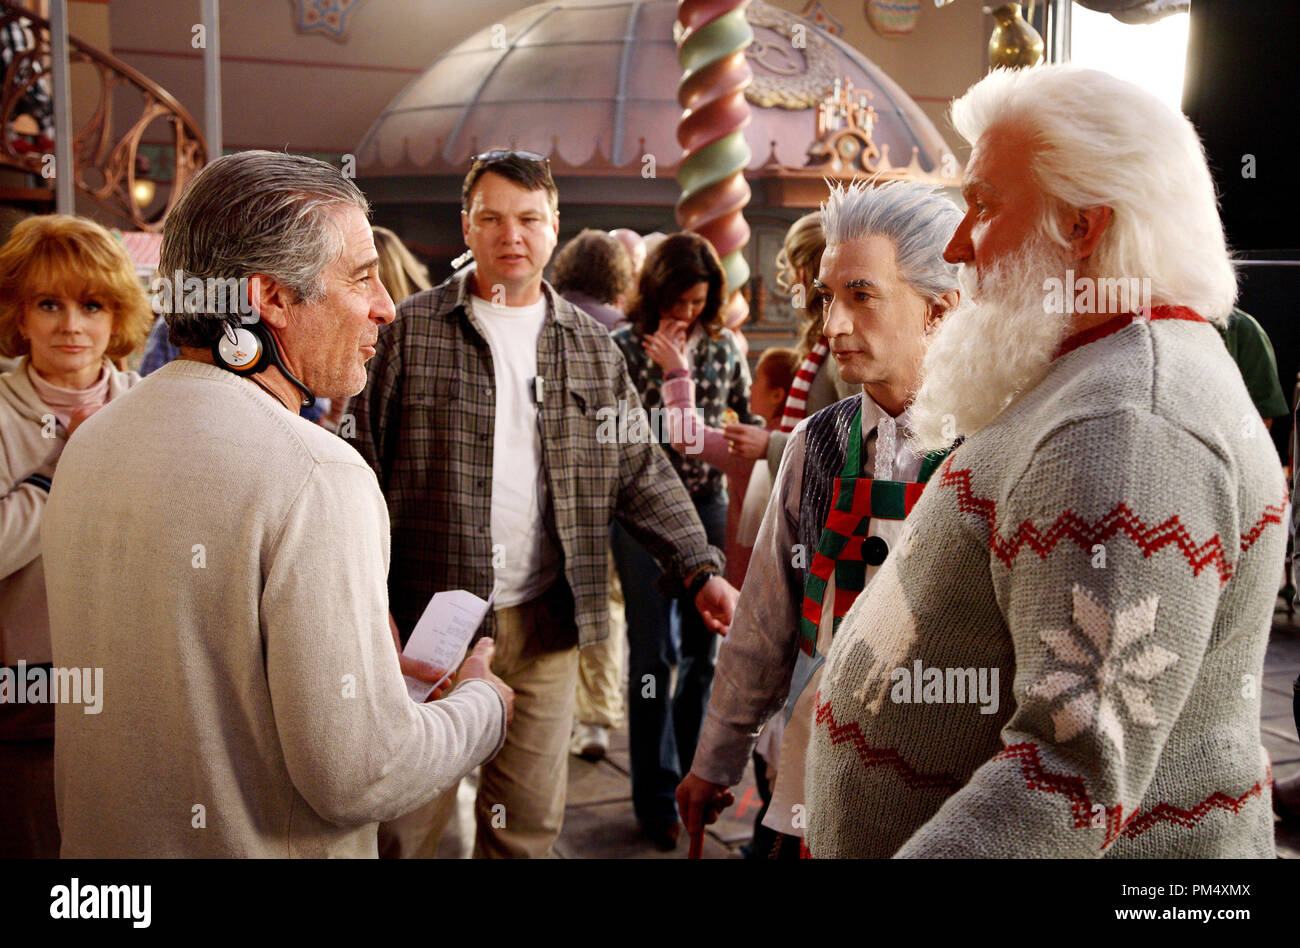 Studio Publicity Still from 'The Santa Clause 3: The Escape Clause' Ann-Margret, Director Michael Lembeck, producer Bruce Franklin, Wendy Crewson, Elizabeth Mitchell, Martin Short, Tim Allen © 2006 Disney Enterprises, Inc. Photo credit: Joseph Lederer   File Reference # 307372596THA  For Editorial Use Only -  All Rights Reserved Stock Photo